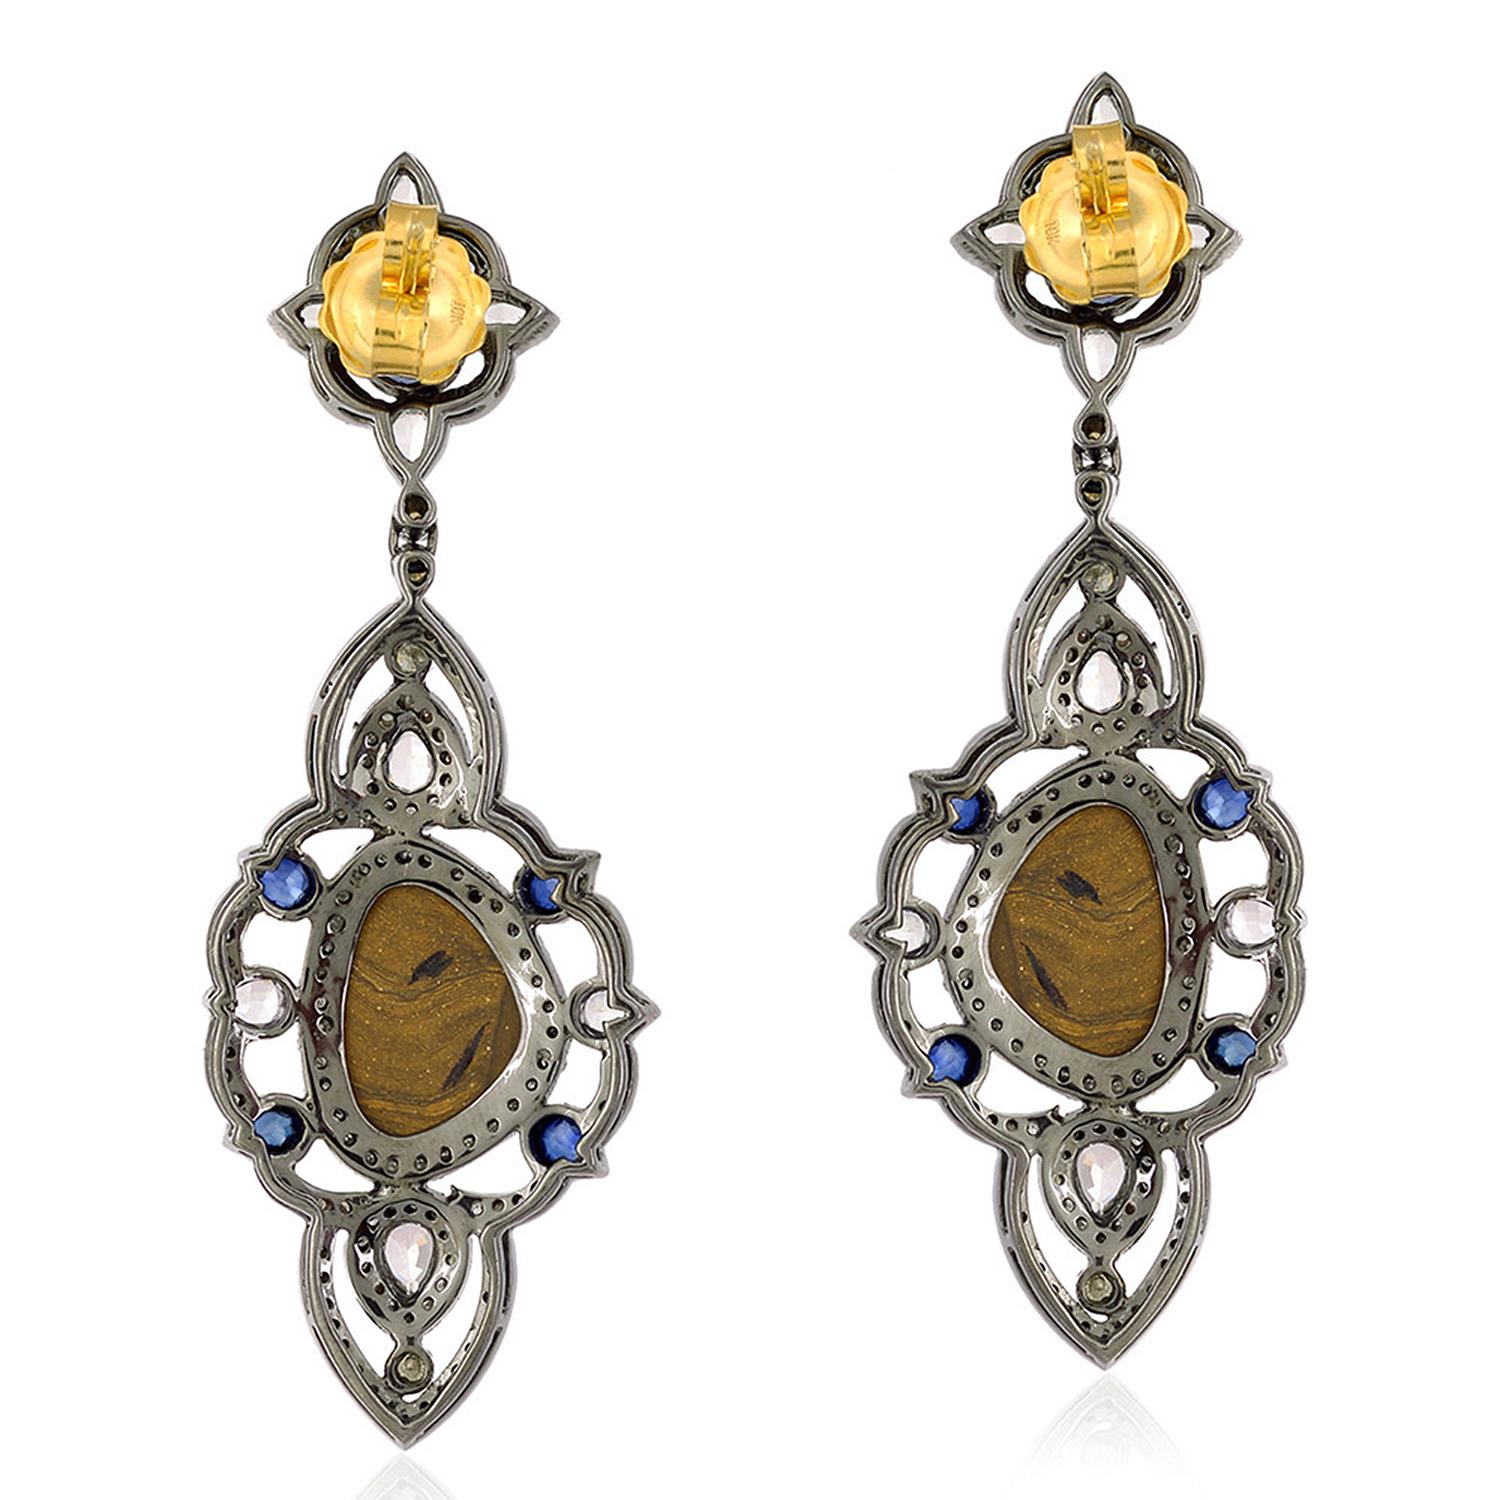 Handcrafted from 18-karat gold and sterling silver, these beautiful drop earrings are set with 6.75 carats Opal doublets, 5.55 carats sapphire and 2.78 carats of glimmering diamonds. 

FOLLOW  MEGHNA JEWELS storefront to view the latest collection &